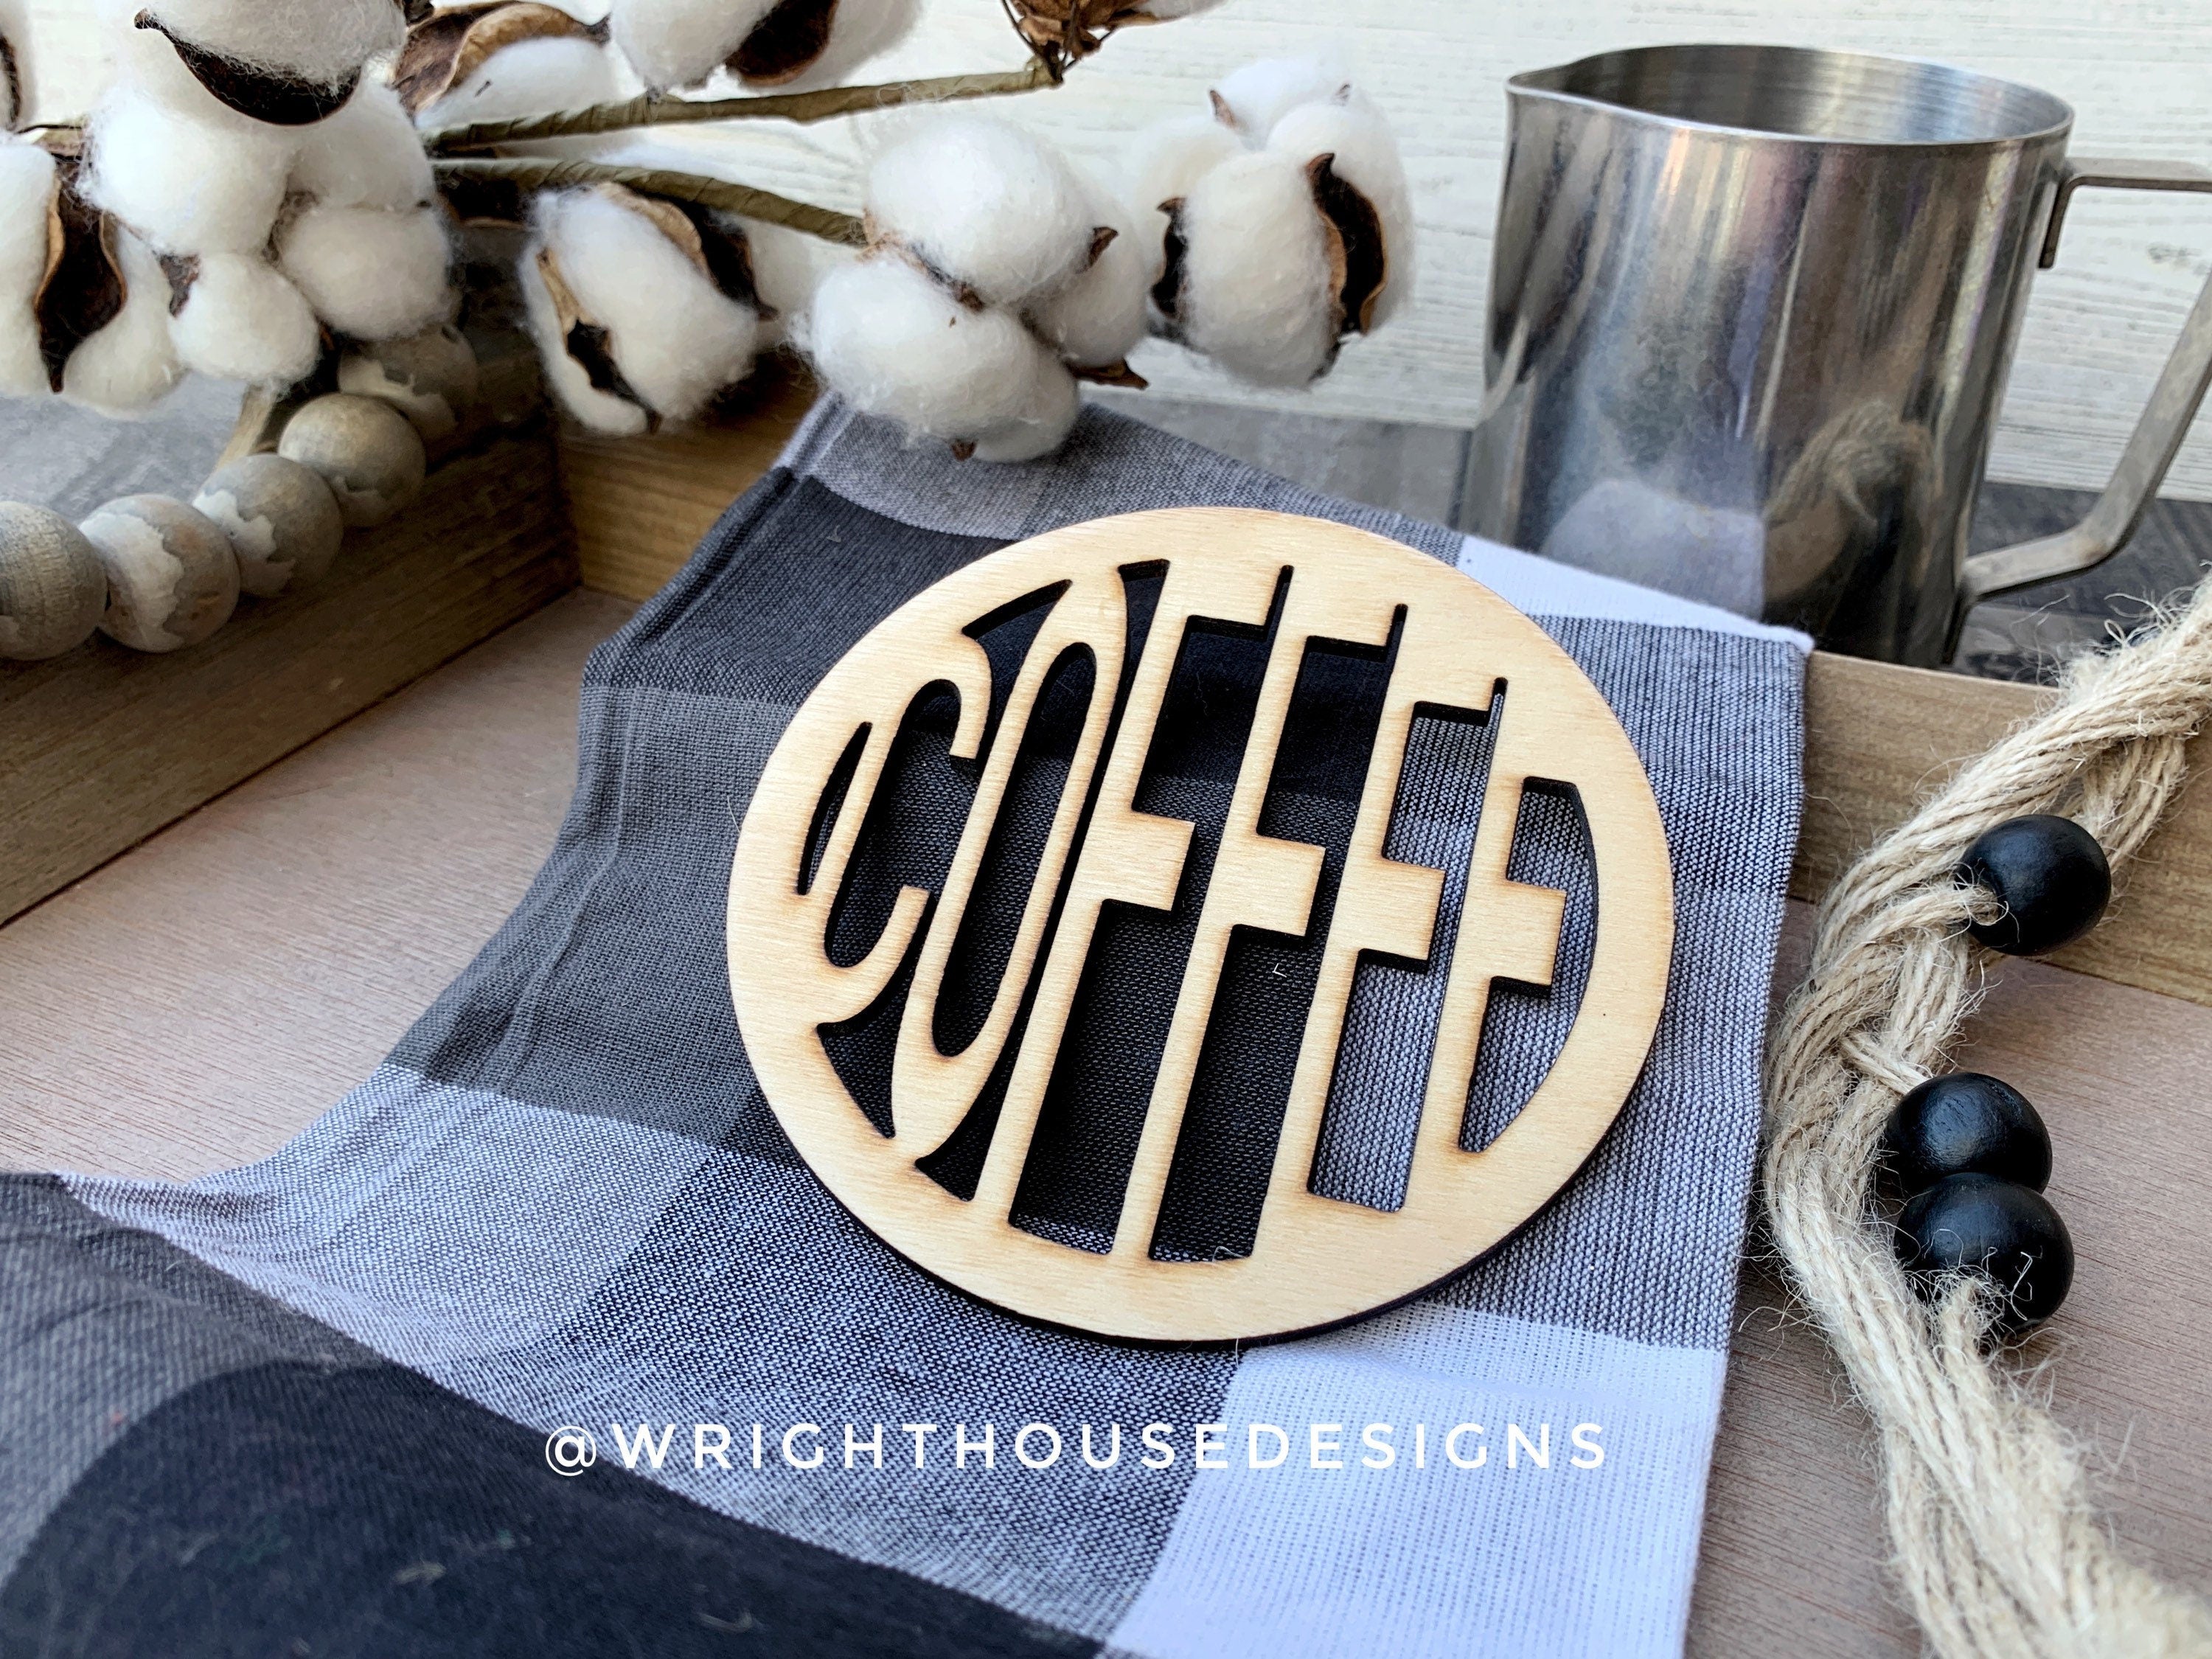 Personalized Single Wooden Coffee and Tea Coaster - Customized Handmade Drink Coasters - Add Your Own Word - Coffee Table and Desk Decor